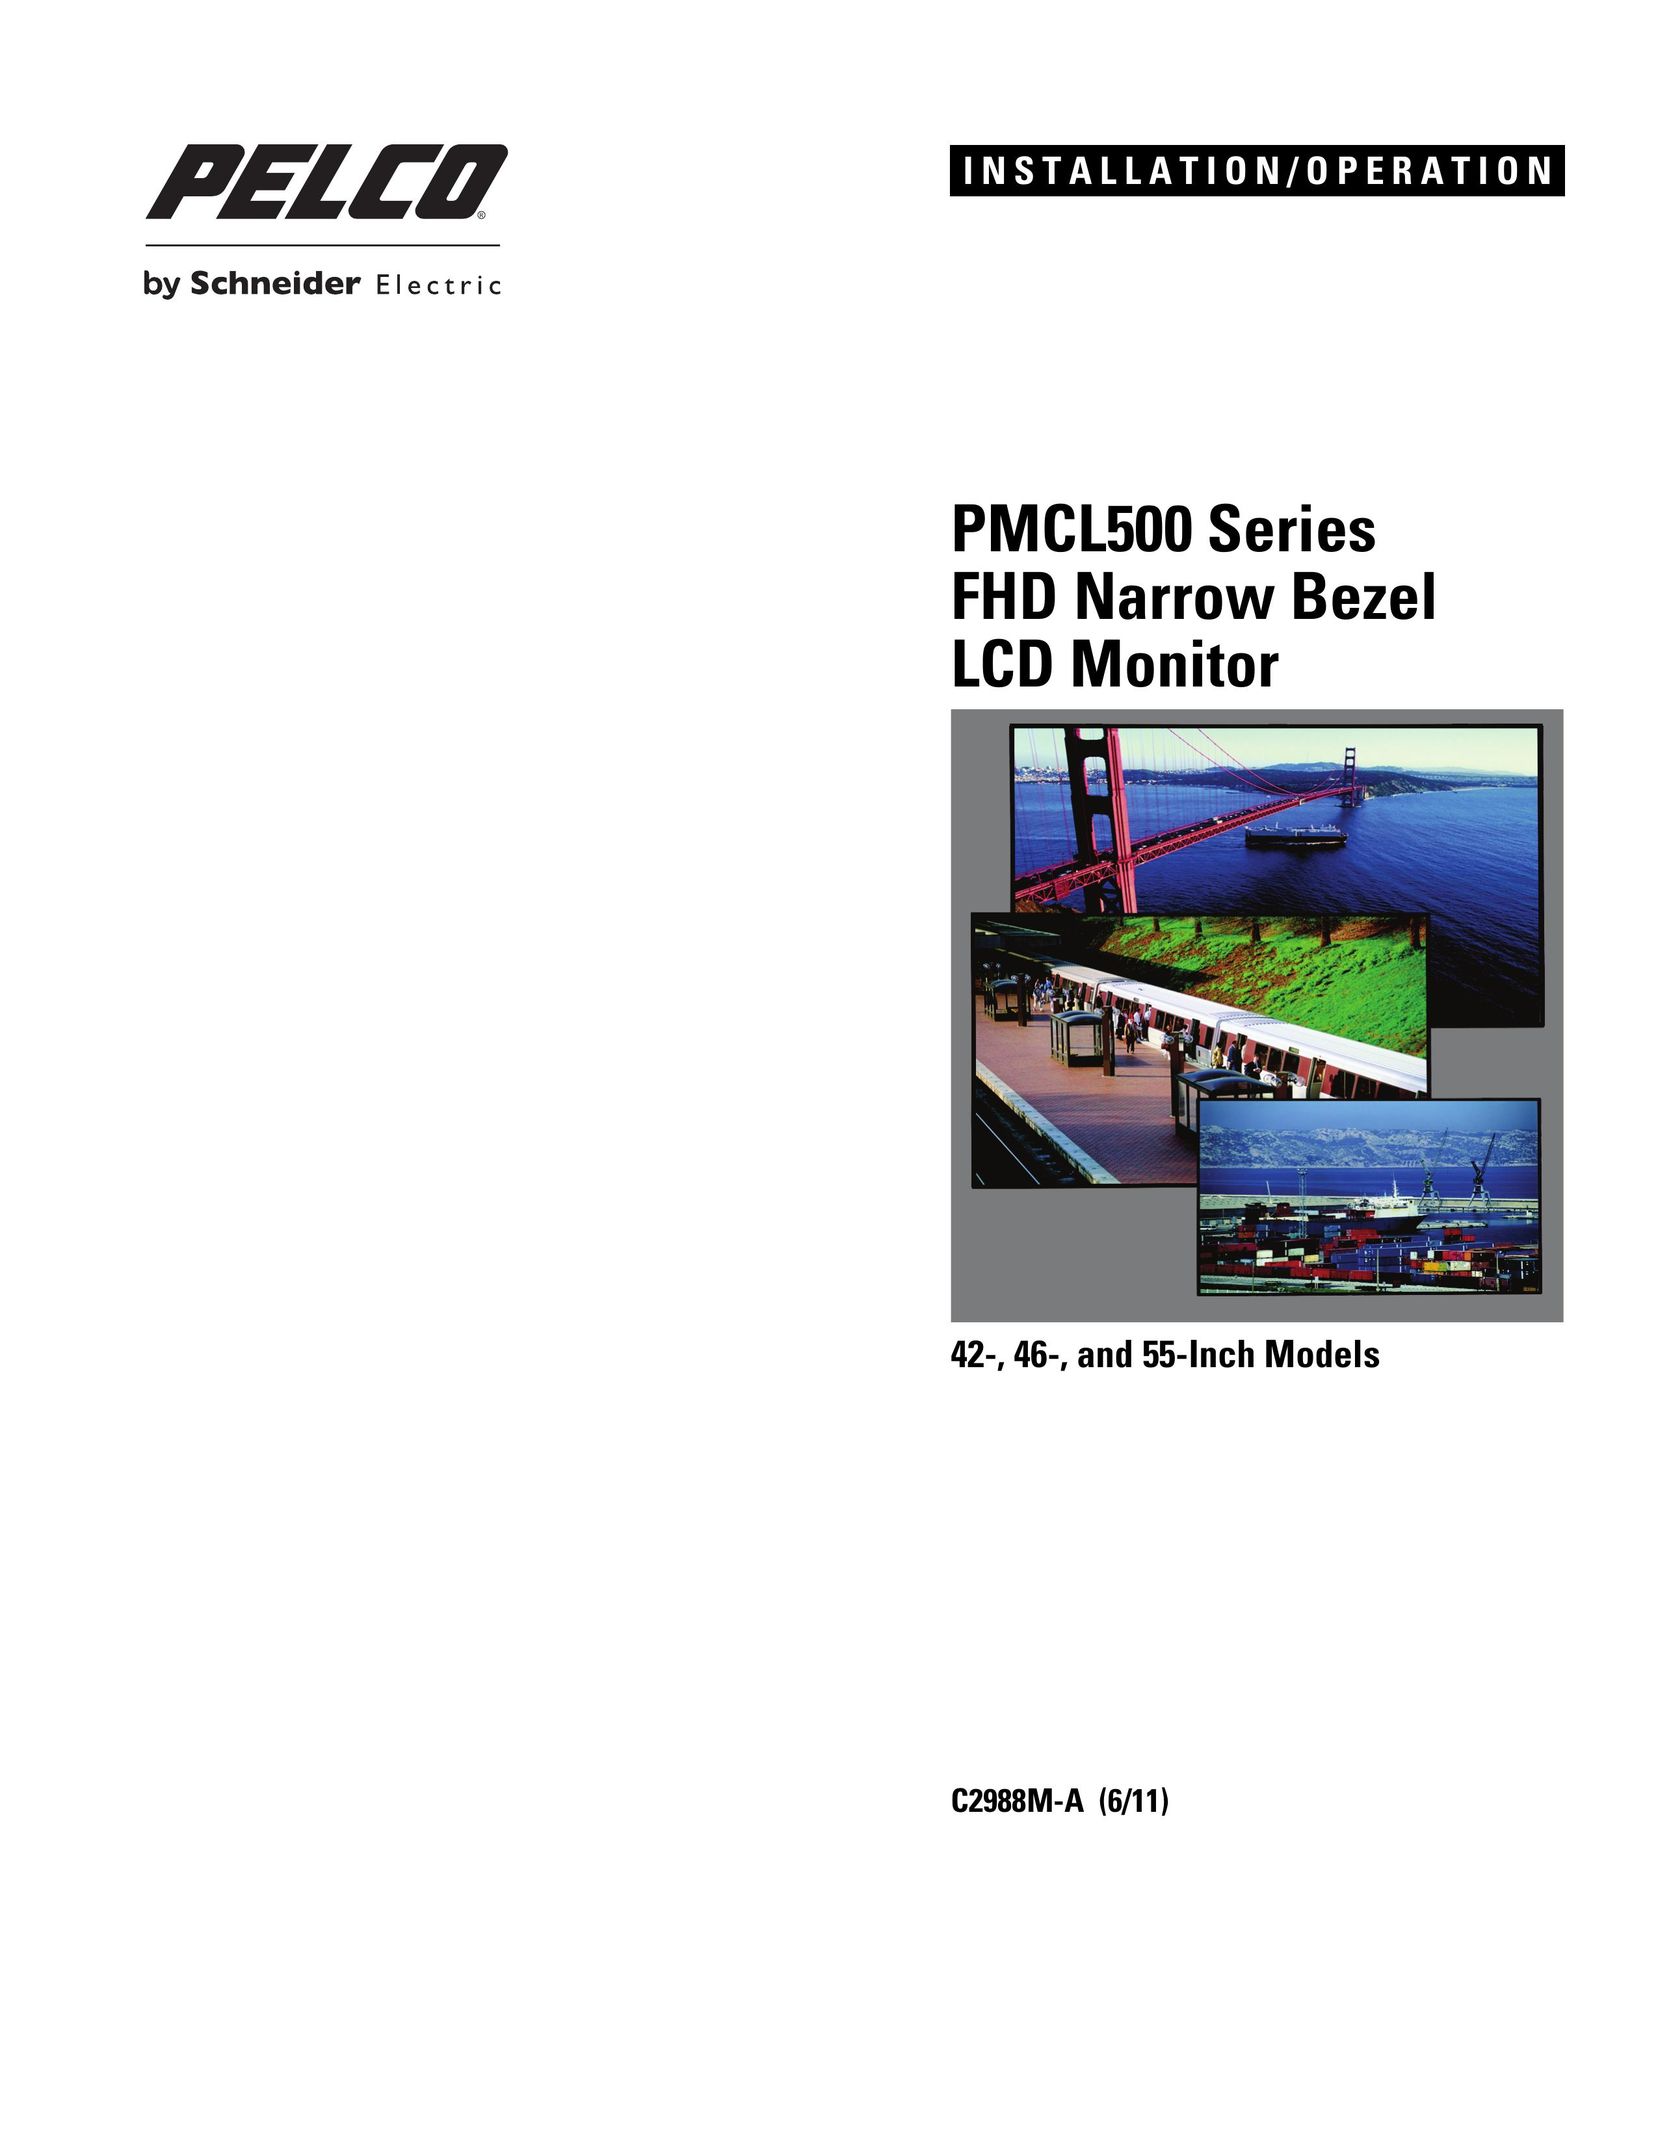 Pelco PMCL500 Car Video System User Manual